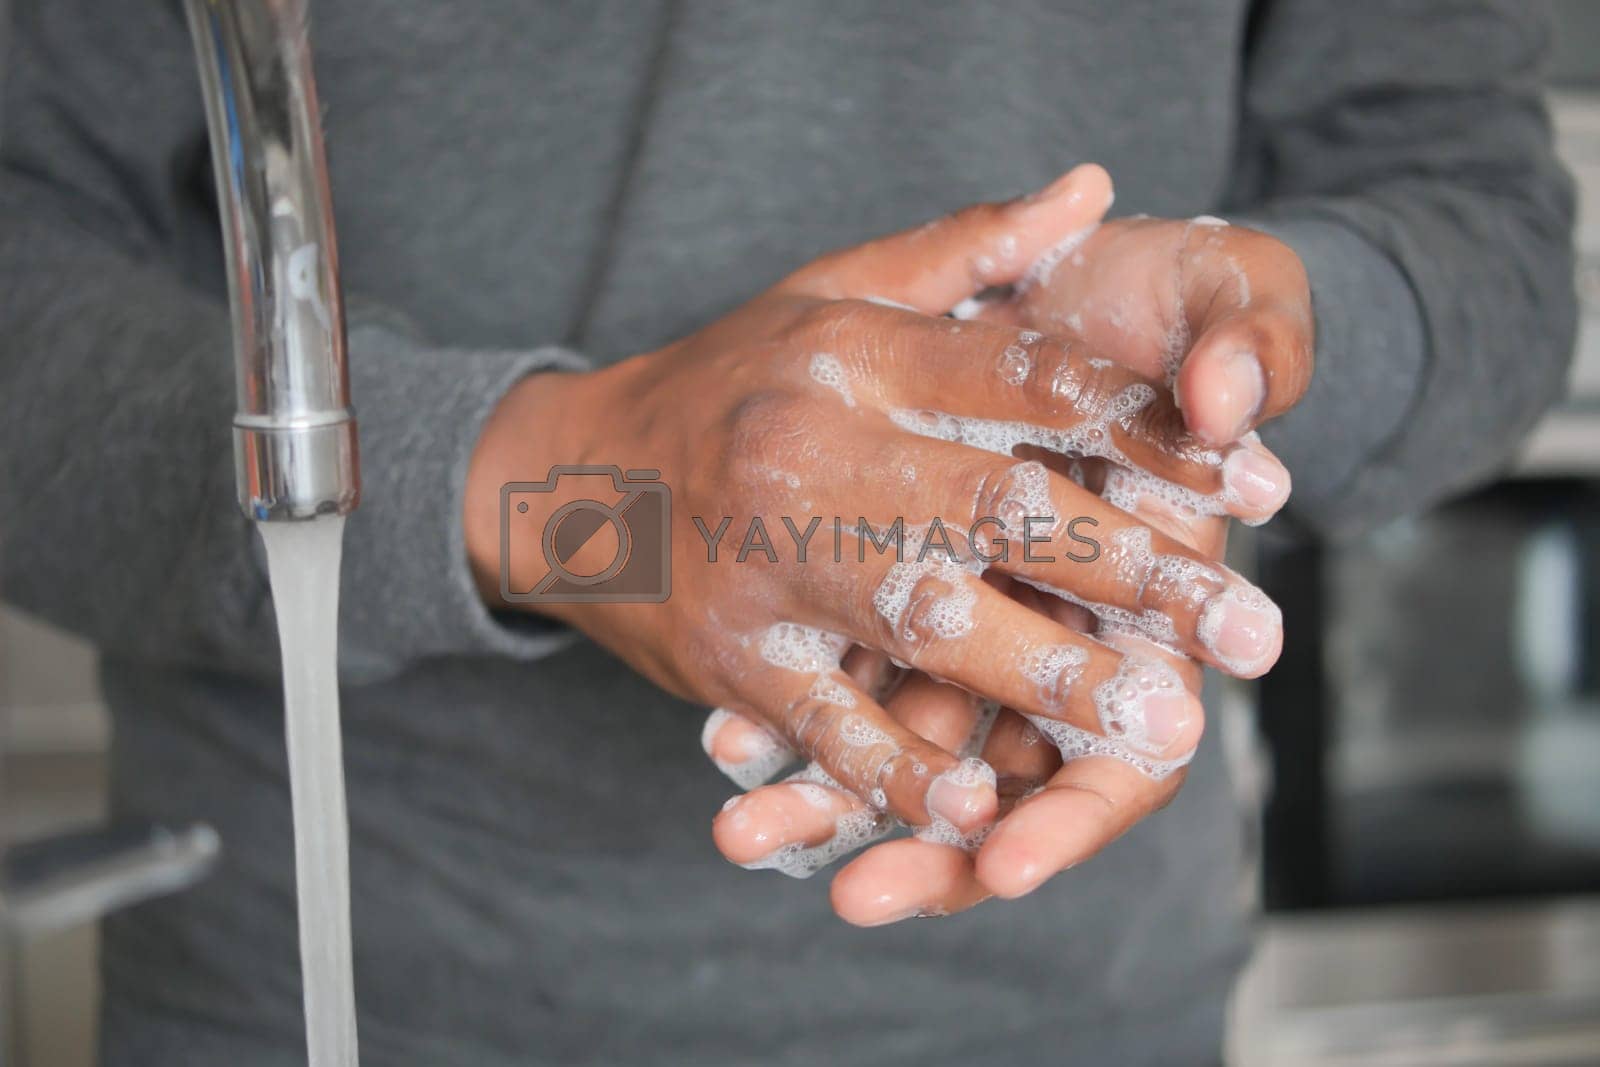 Royalty free image of young man washing hands with soap warm water by towfiq007